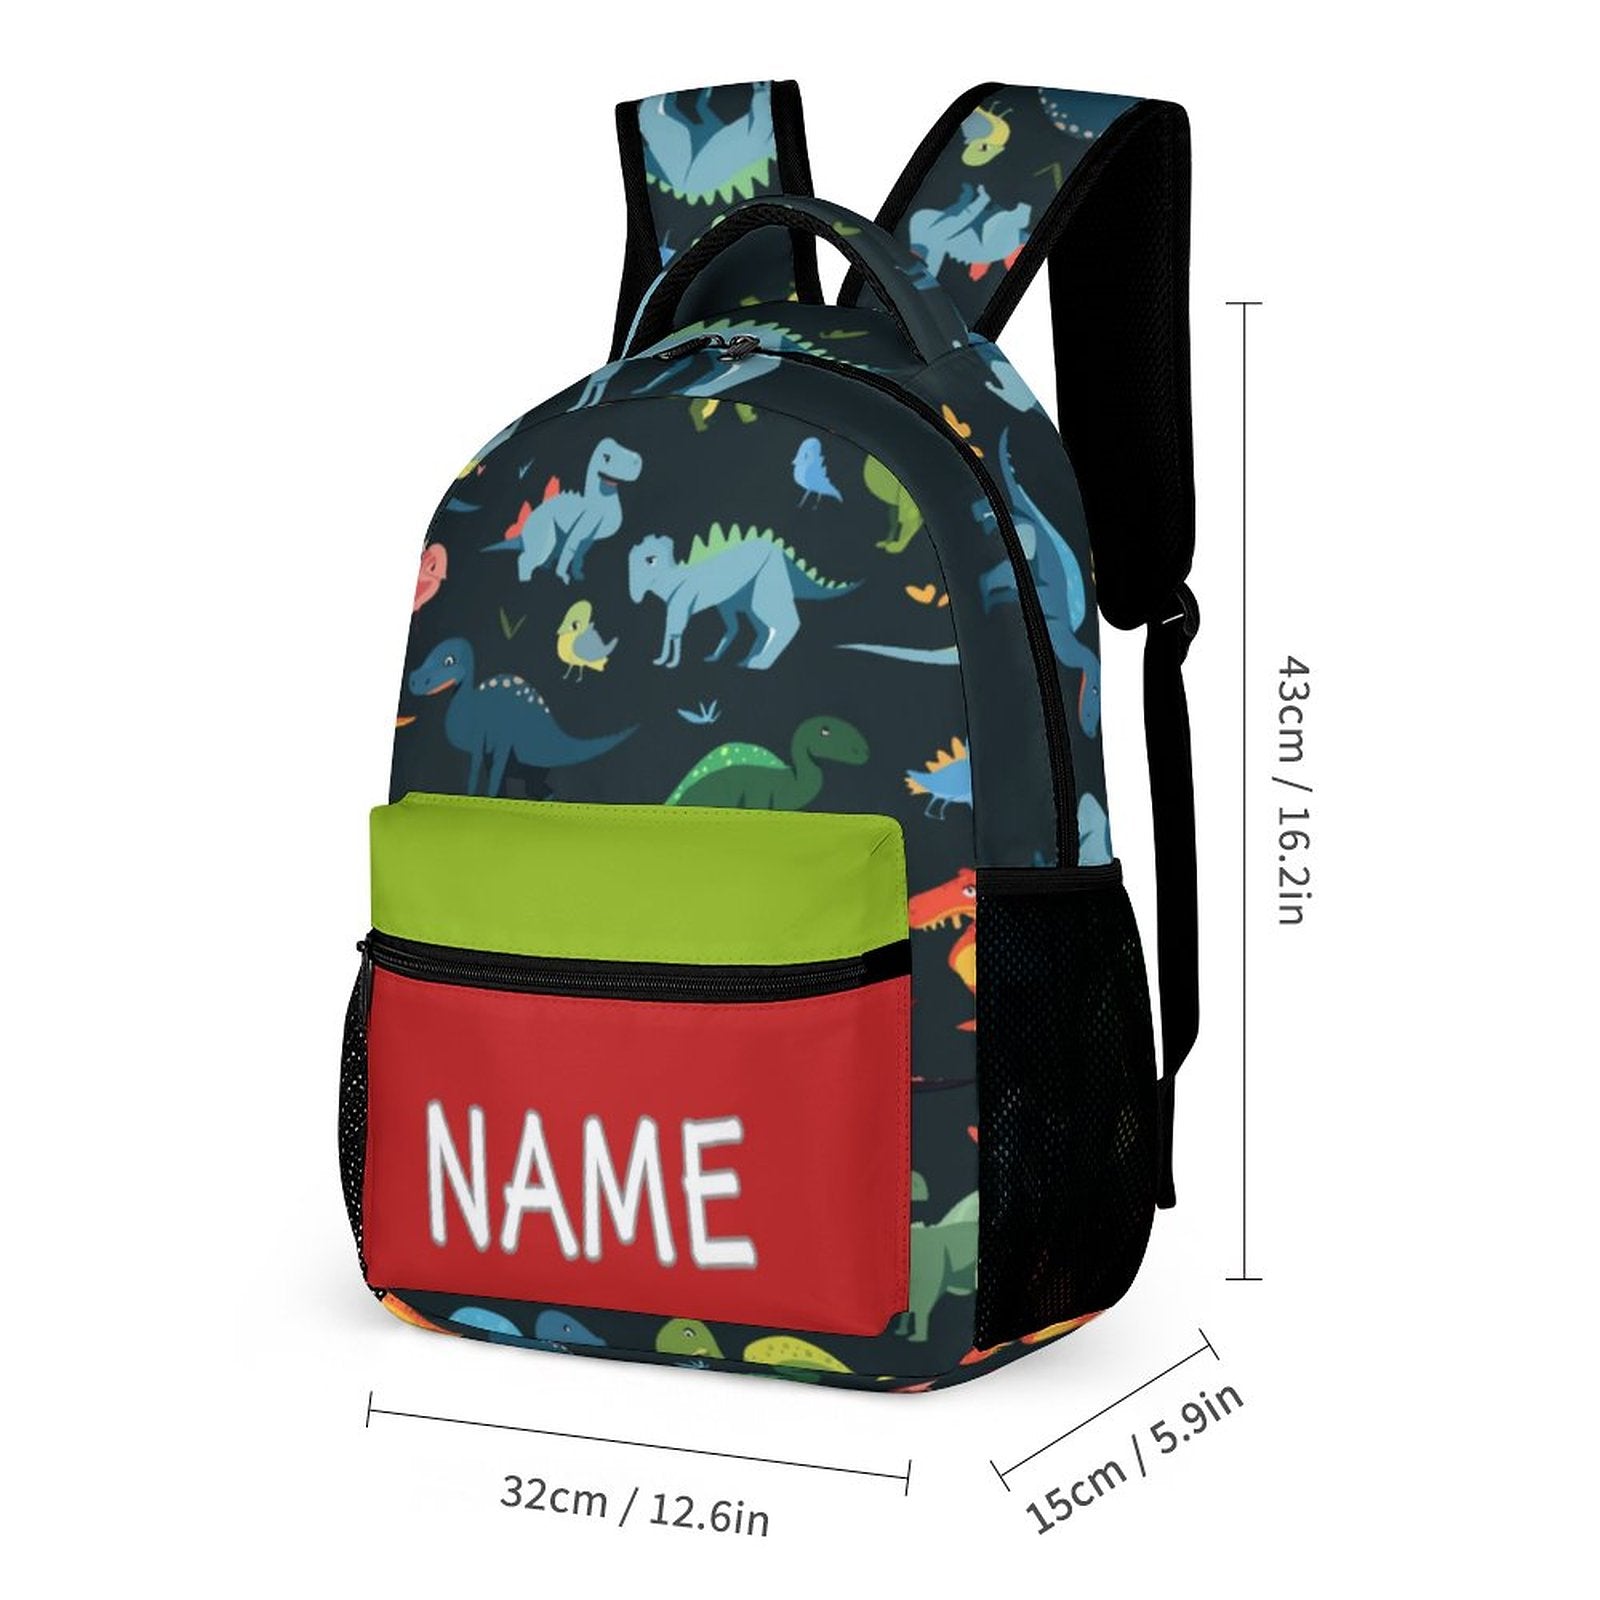 Personalized Backpack with Name, Custom Backpack for Back to School Gifts, Durable Personalized School Backpack for Kids